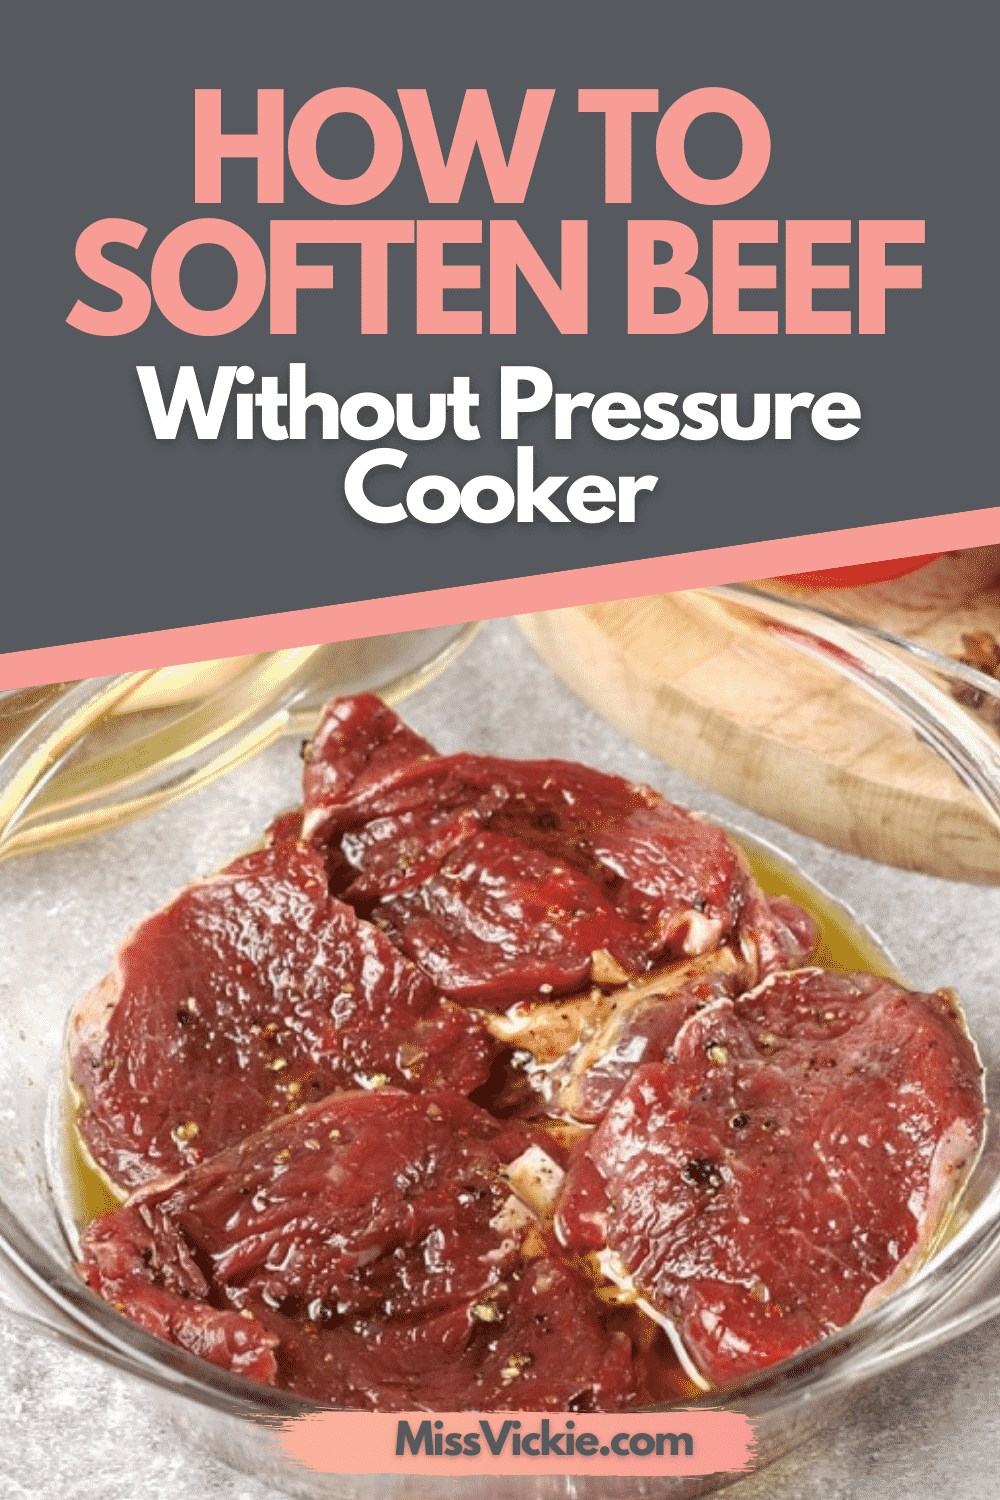 How To Soften Beef Without Pressure Cooker